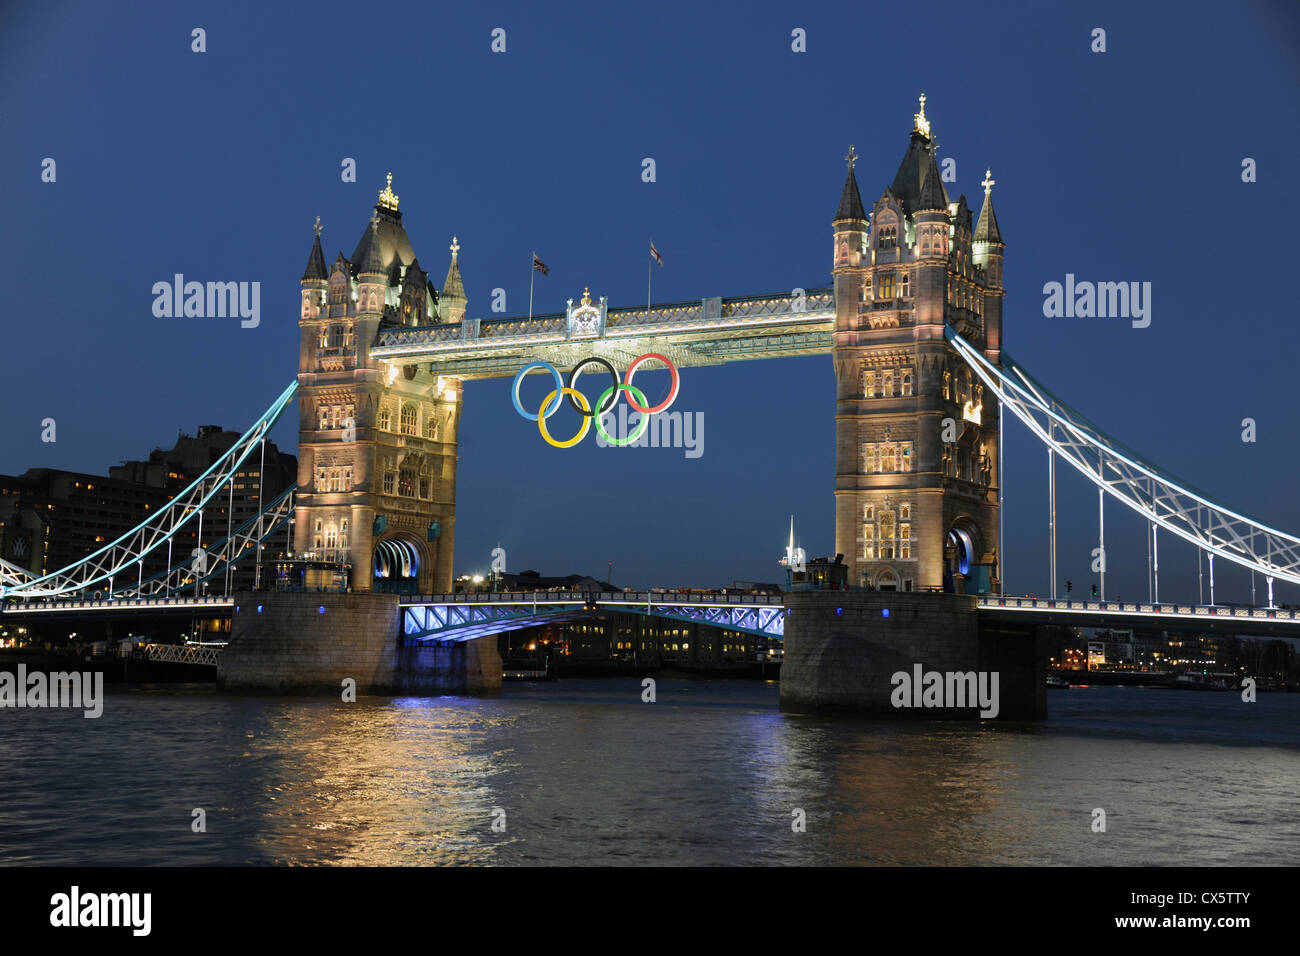 The Olympic rings displayed on Tower Bridge during the London 2012 Olympic Games. Stock Photo